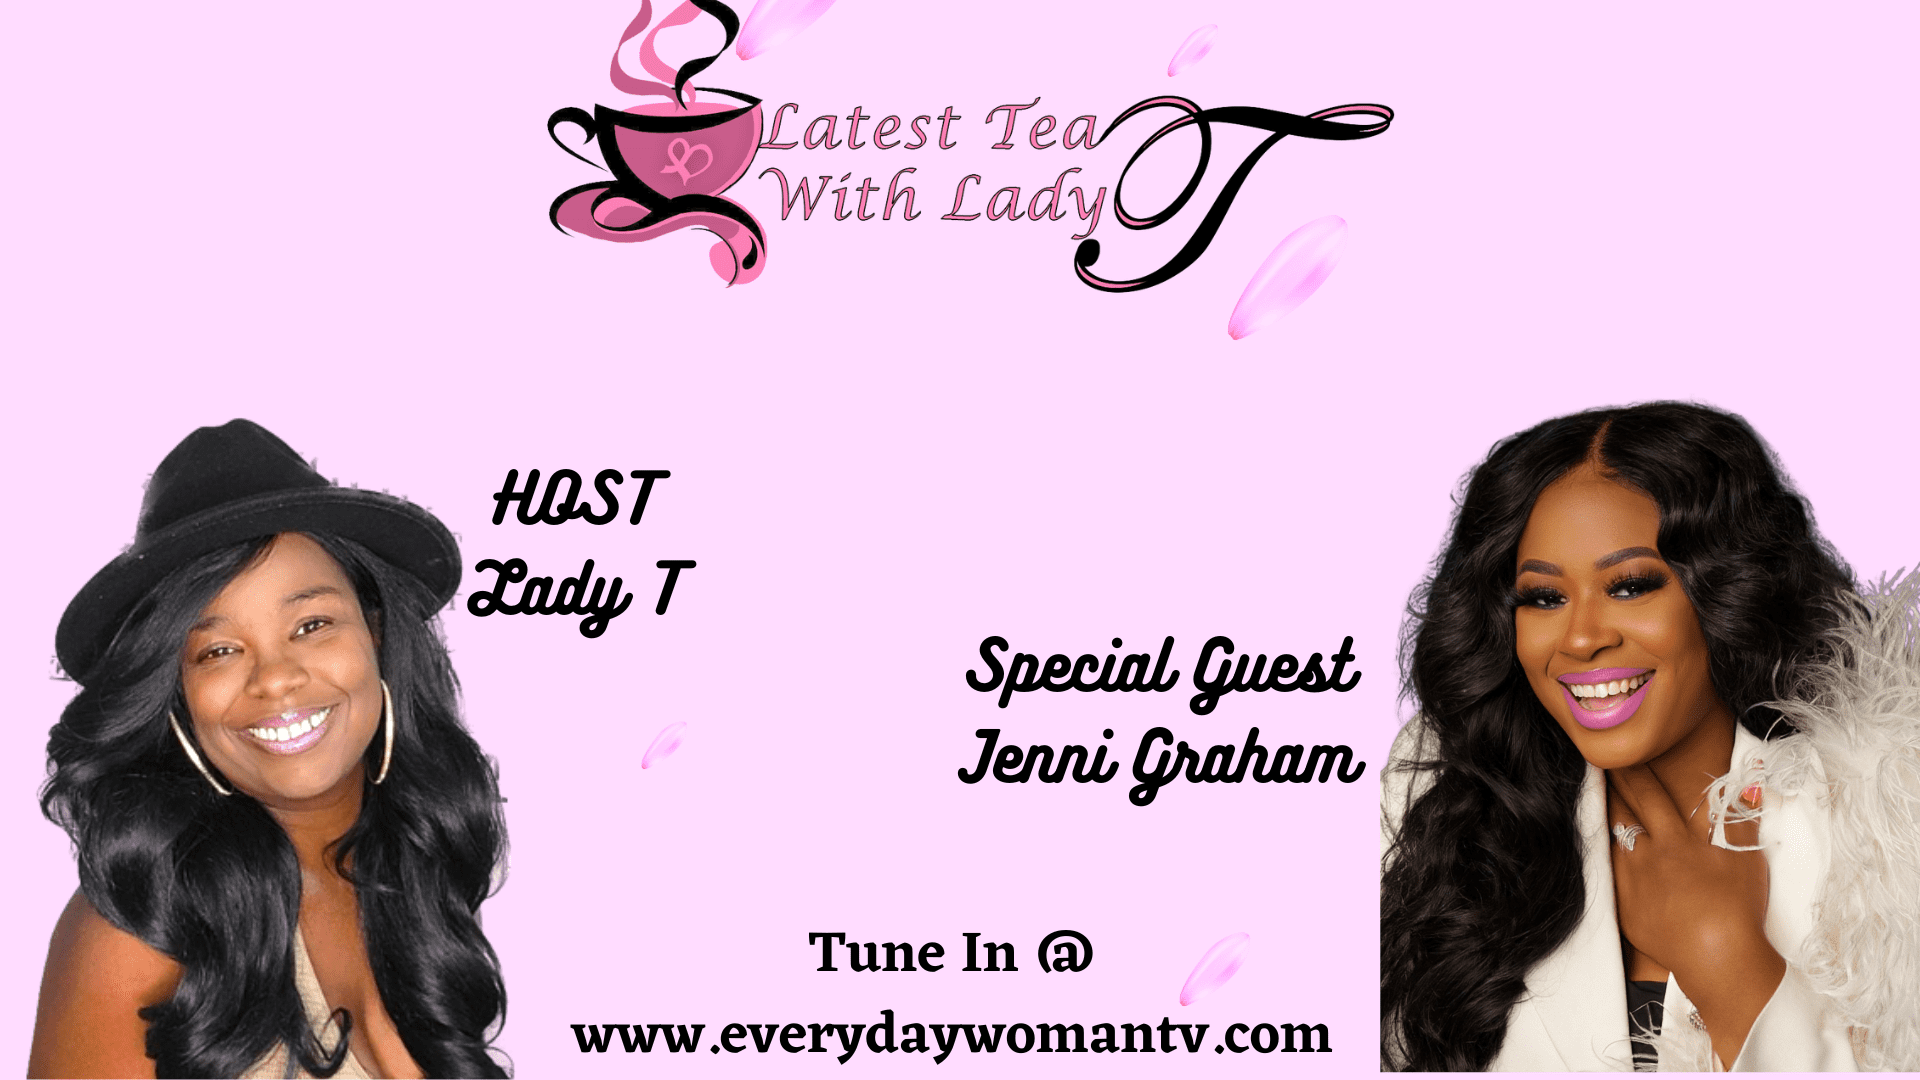 Interview With Jenni ‘JChic’ Graham – The Latest Tea With Lady T